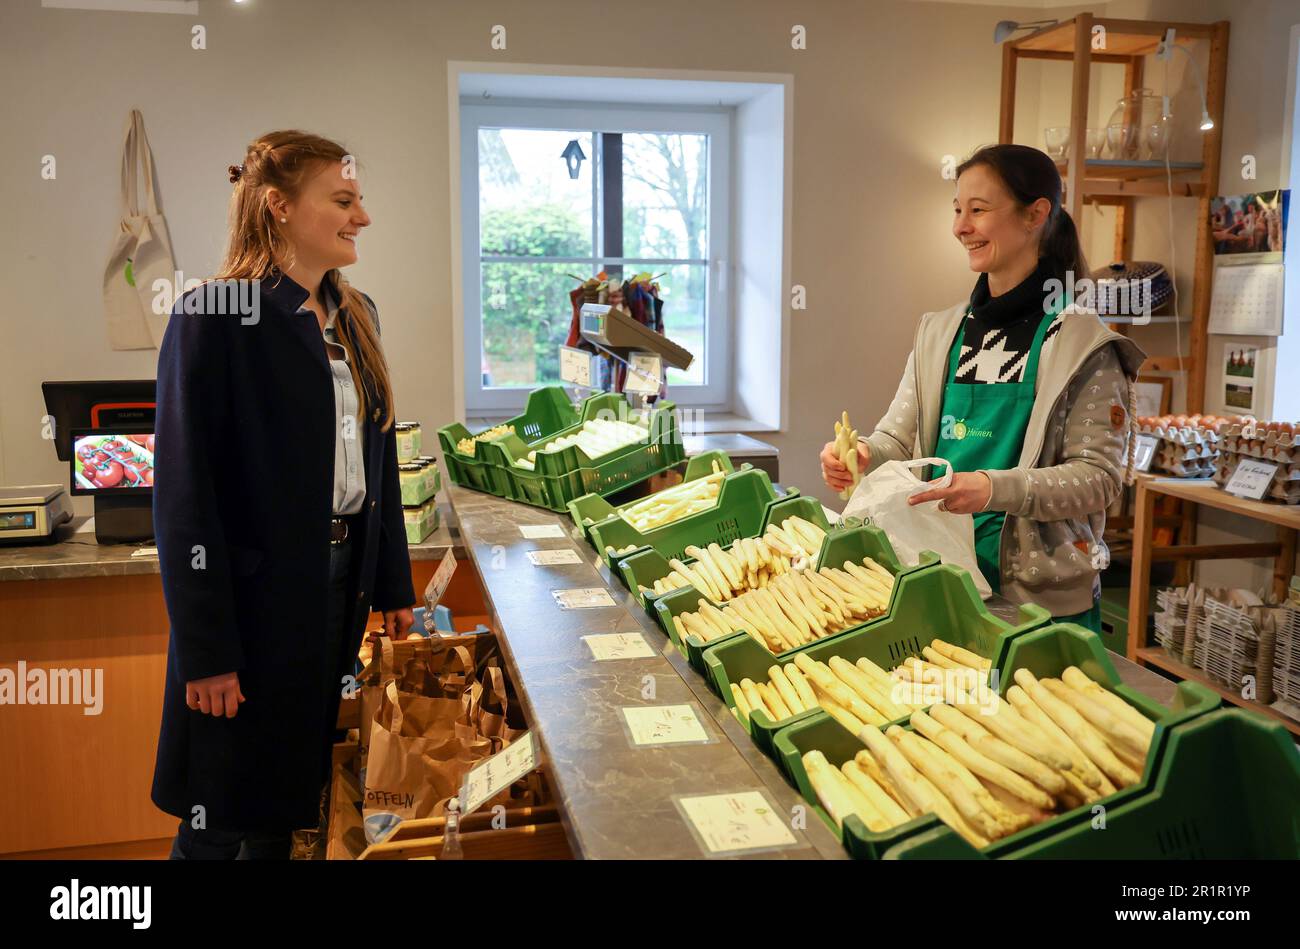 Wesel, North Rhine-Westphalia, Germany - Customer buys asparagus in the farm store, here on the occasion of a press event for the opening of the asparagus season at the Heinen asparagus and fruit farm. Stock Photo